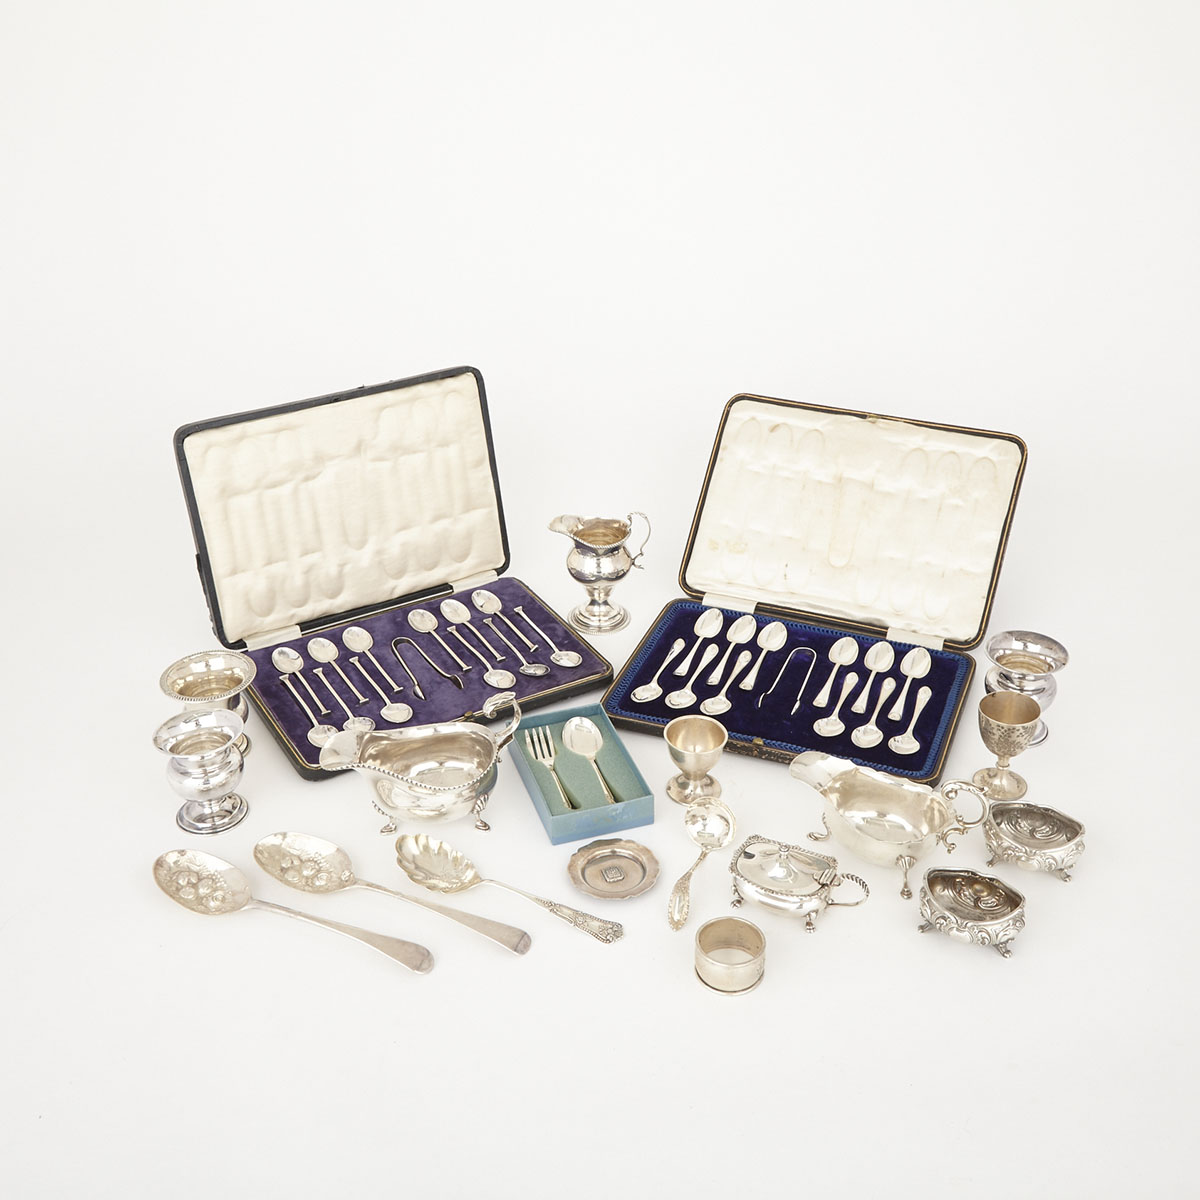 Grouped Lot of French, English and North American Silver, 19th/20th century